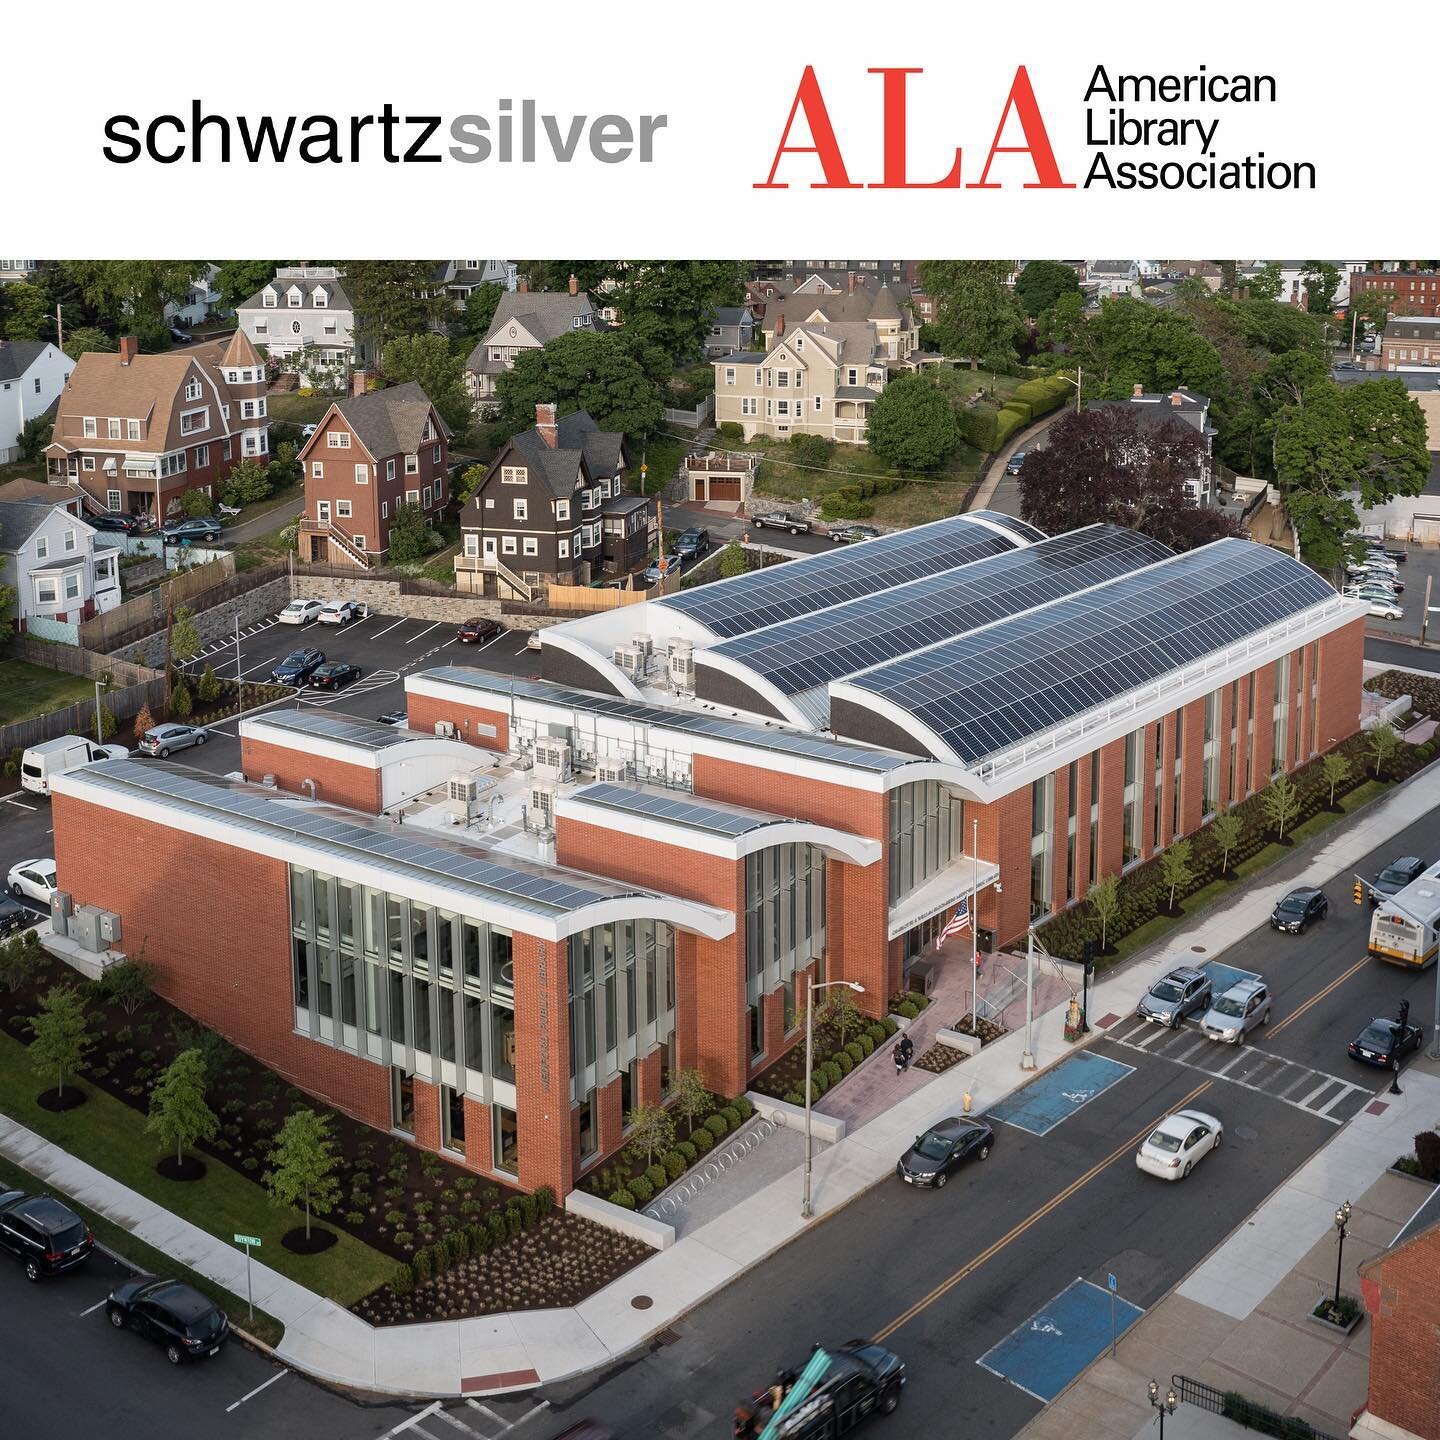 Schwartz/Silver Architects will be presenting at the American Library Association&rsquo;s annual conference in Chicago on June 25th. Firm President Angela Ward Hyatt will be moderating the panel we are calling &ldquo;Understanding and Advocating for 